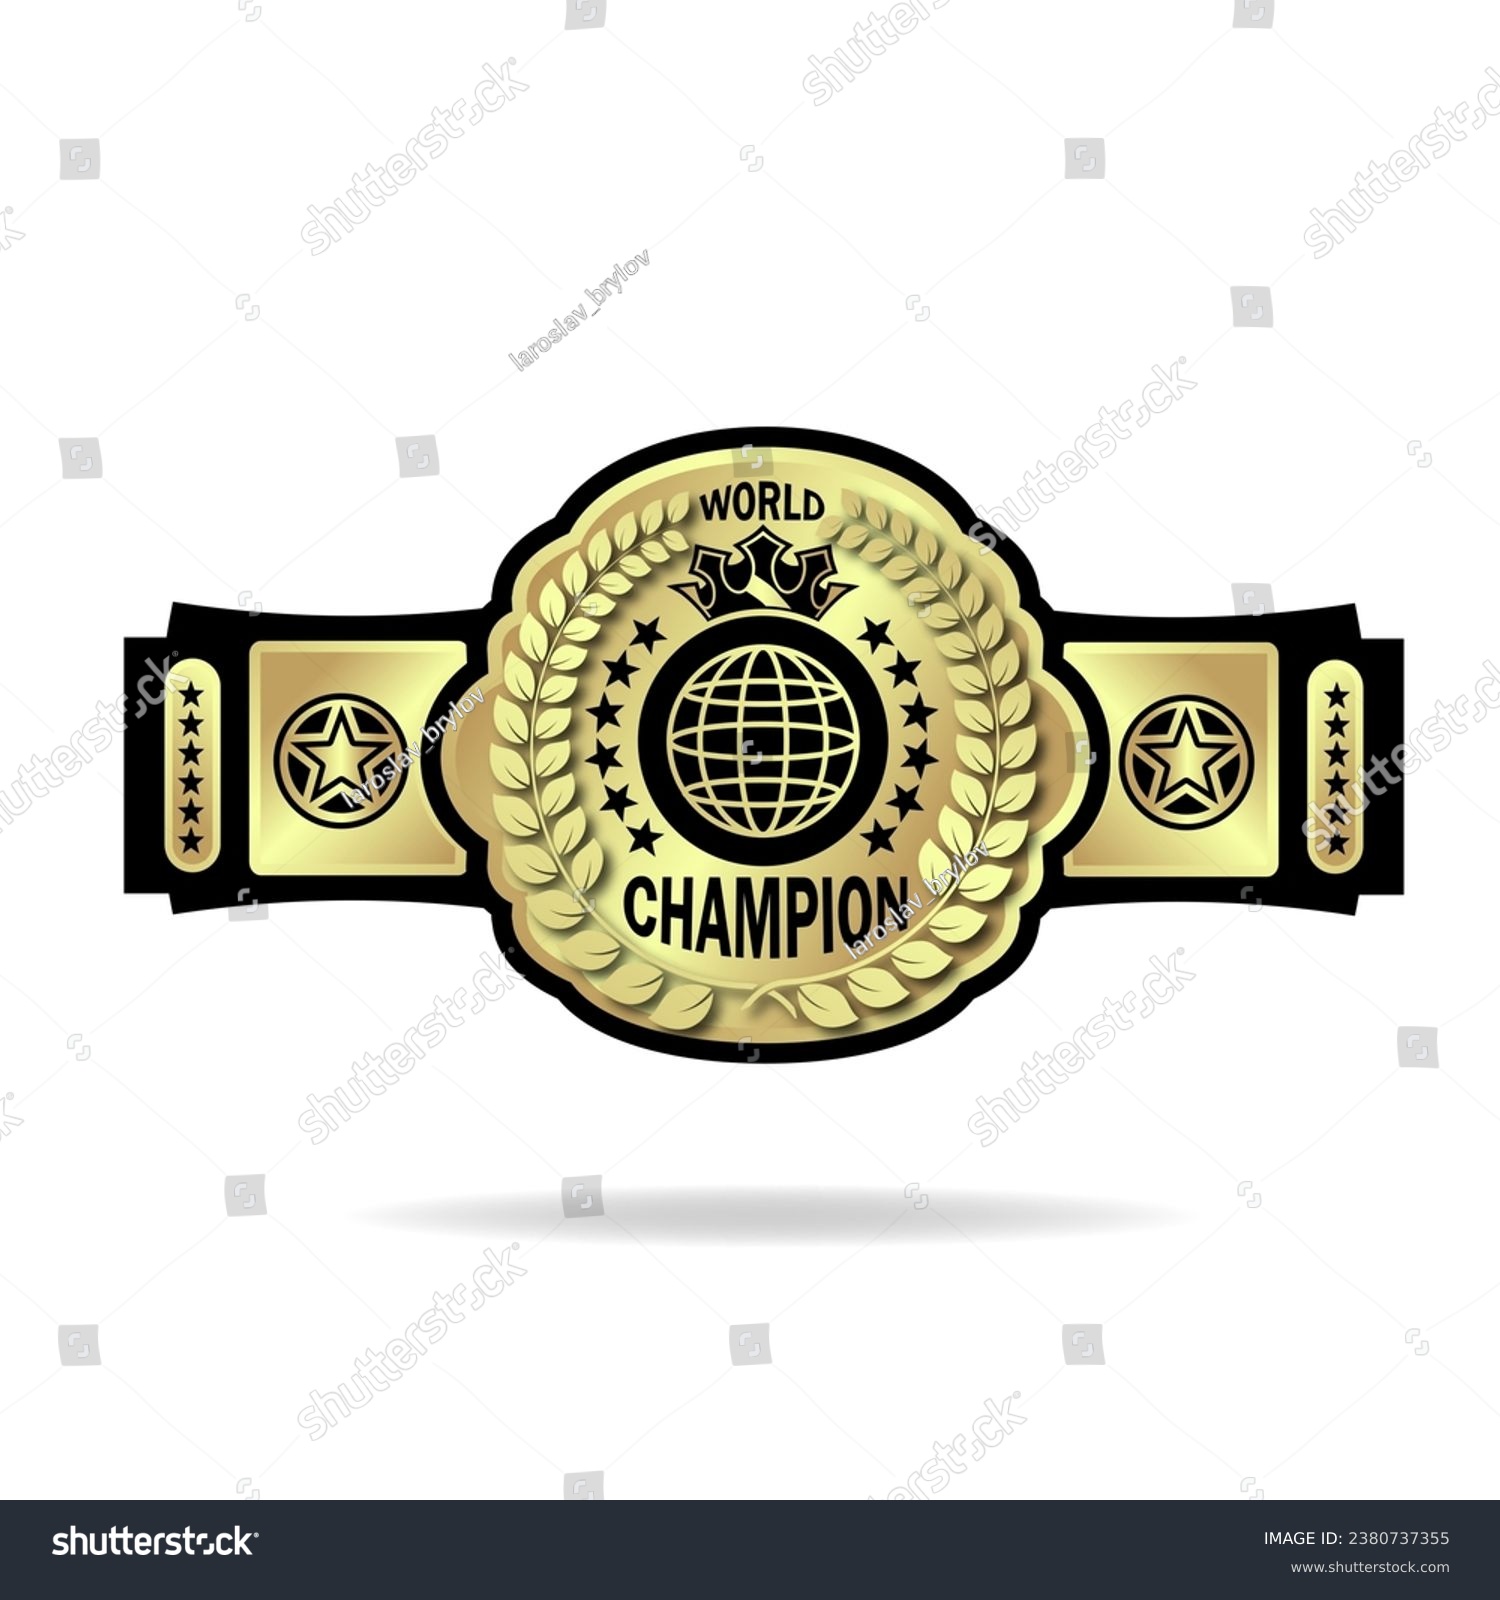 SVG of boxing championship belt with two letters WORLD CHAMPION svg